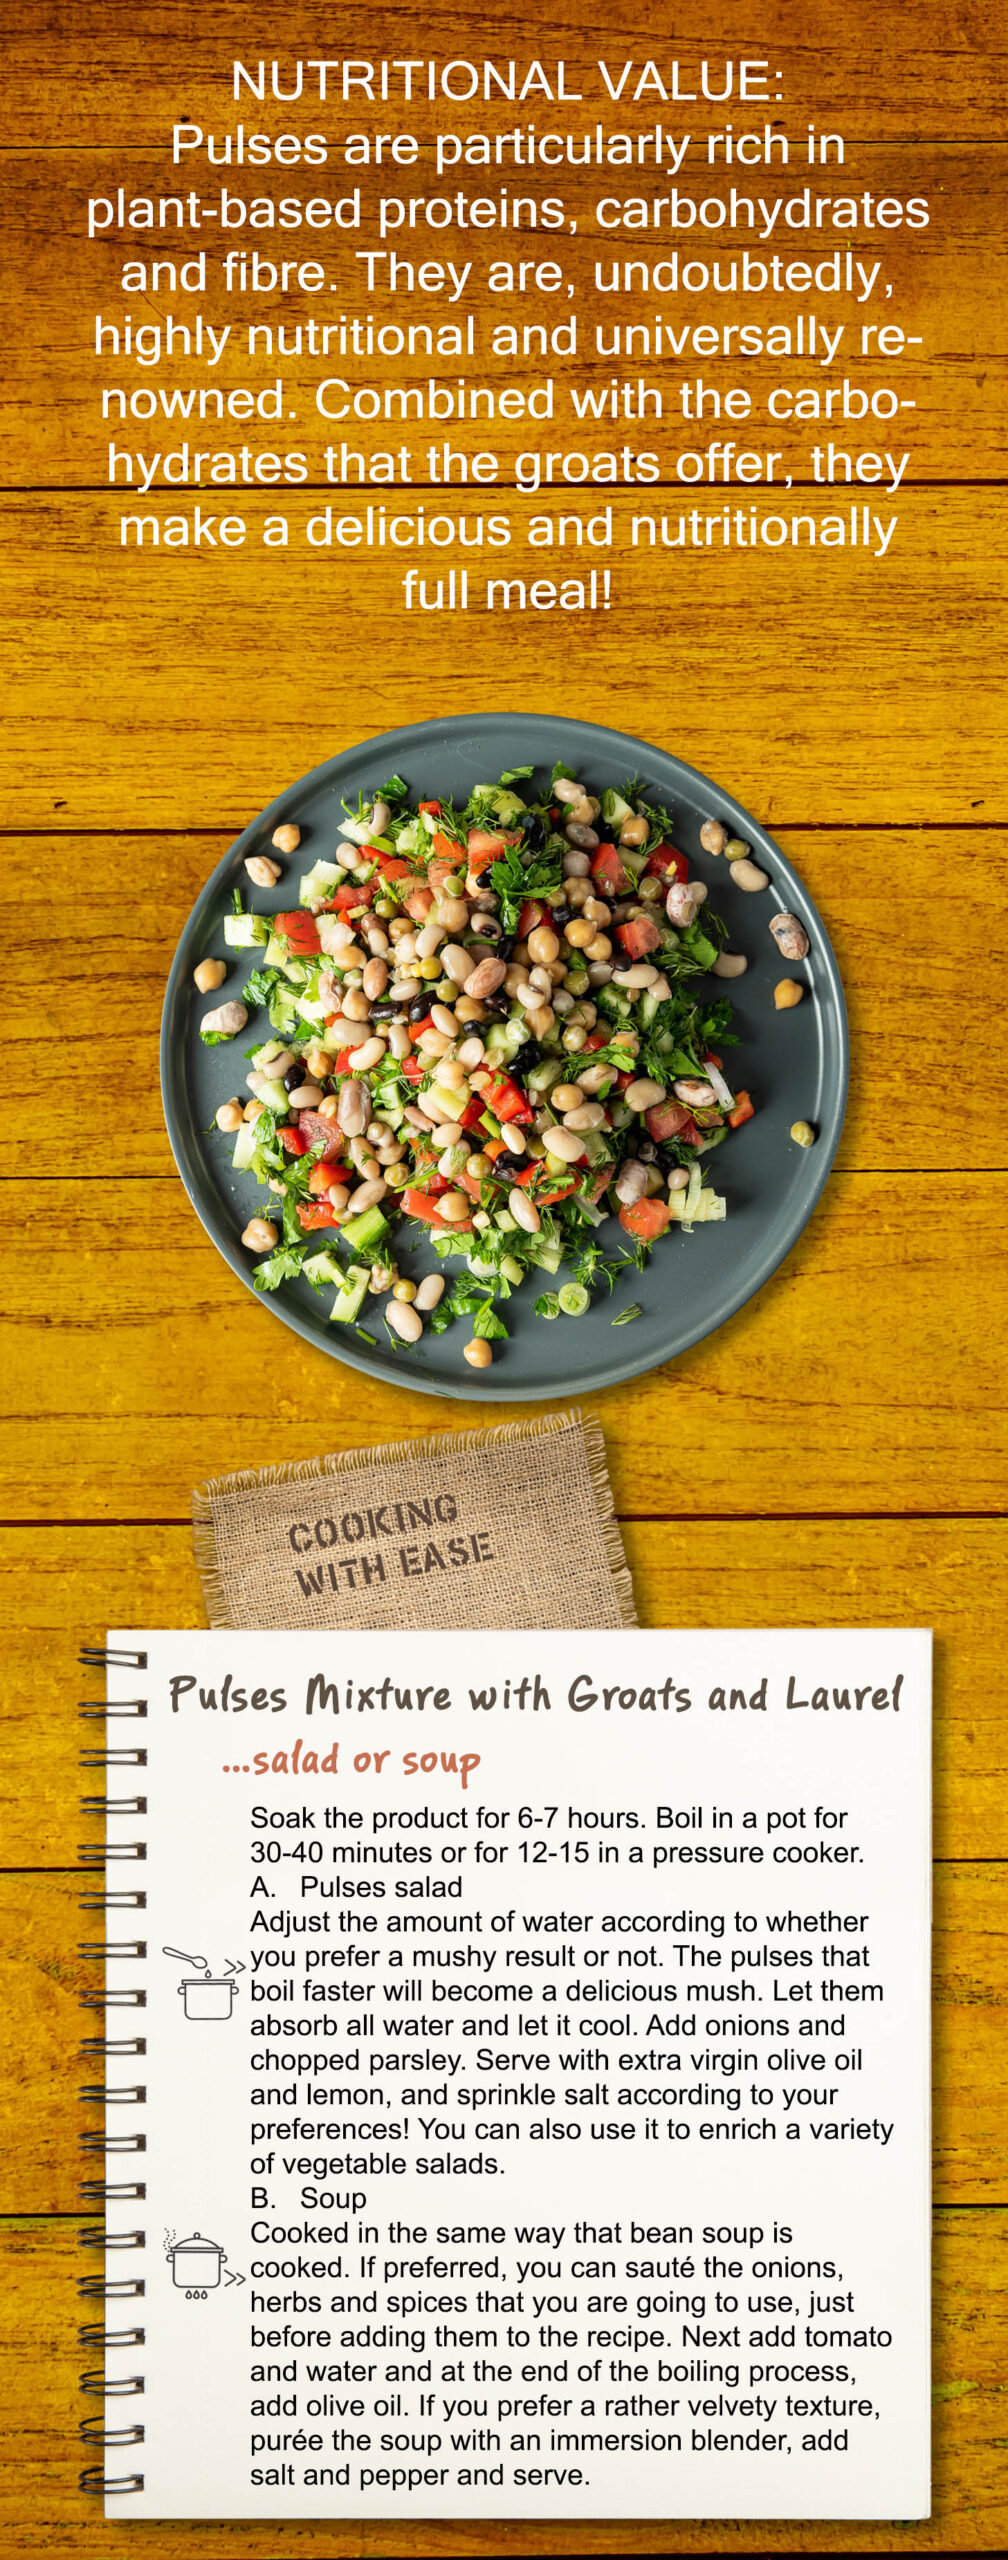 Pulses are particularly rich in plant-based proteins, carbohydrates and fibre. They are, undoubtedly, highly nutritional and universally renowned. Combined with the carbohydrates that the groats offer, they make a delicious and nutritionally full meal!